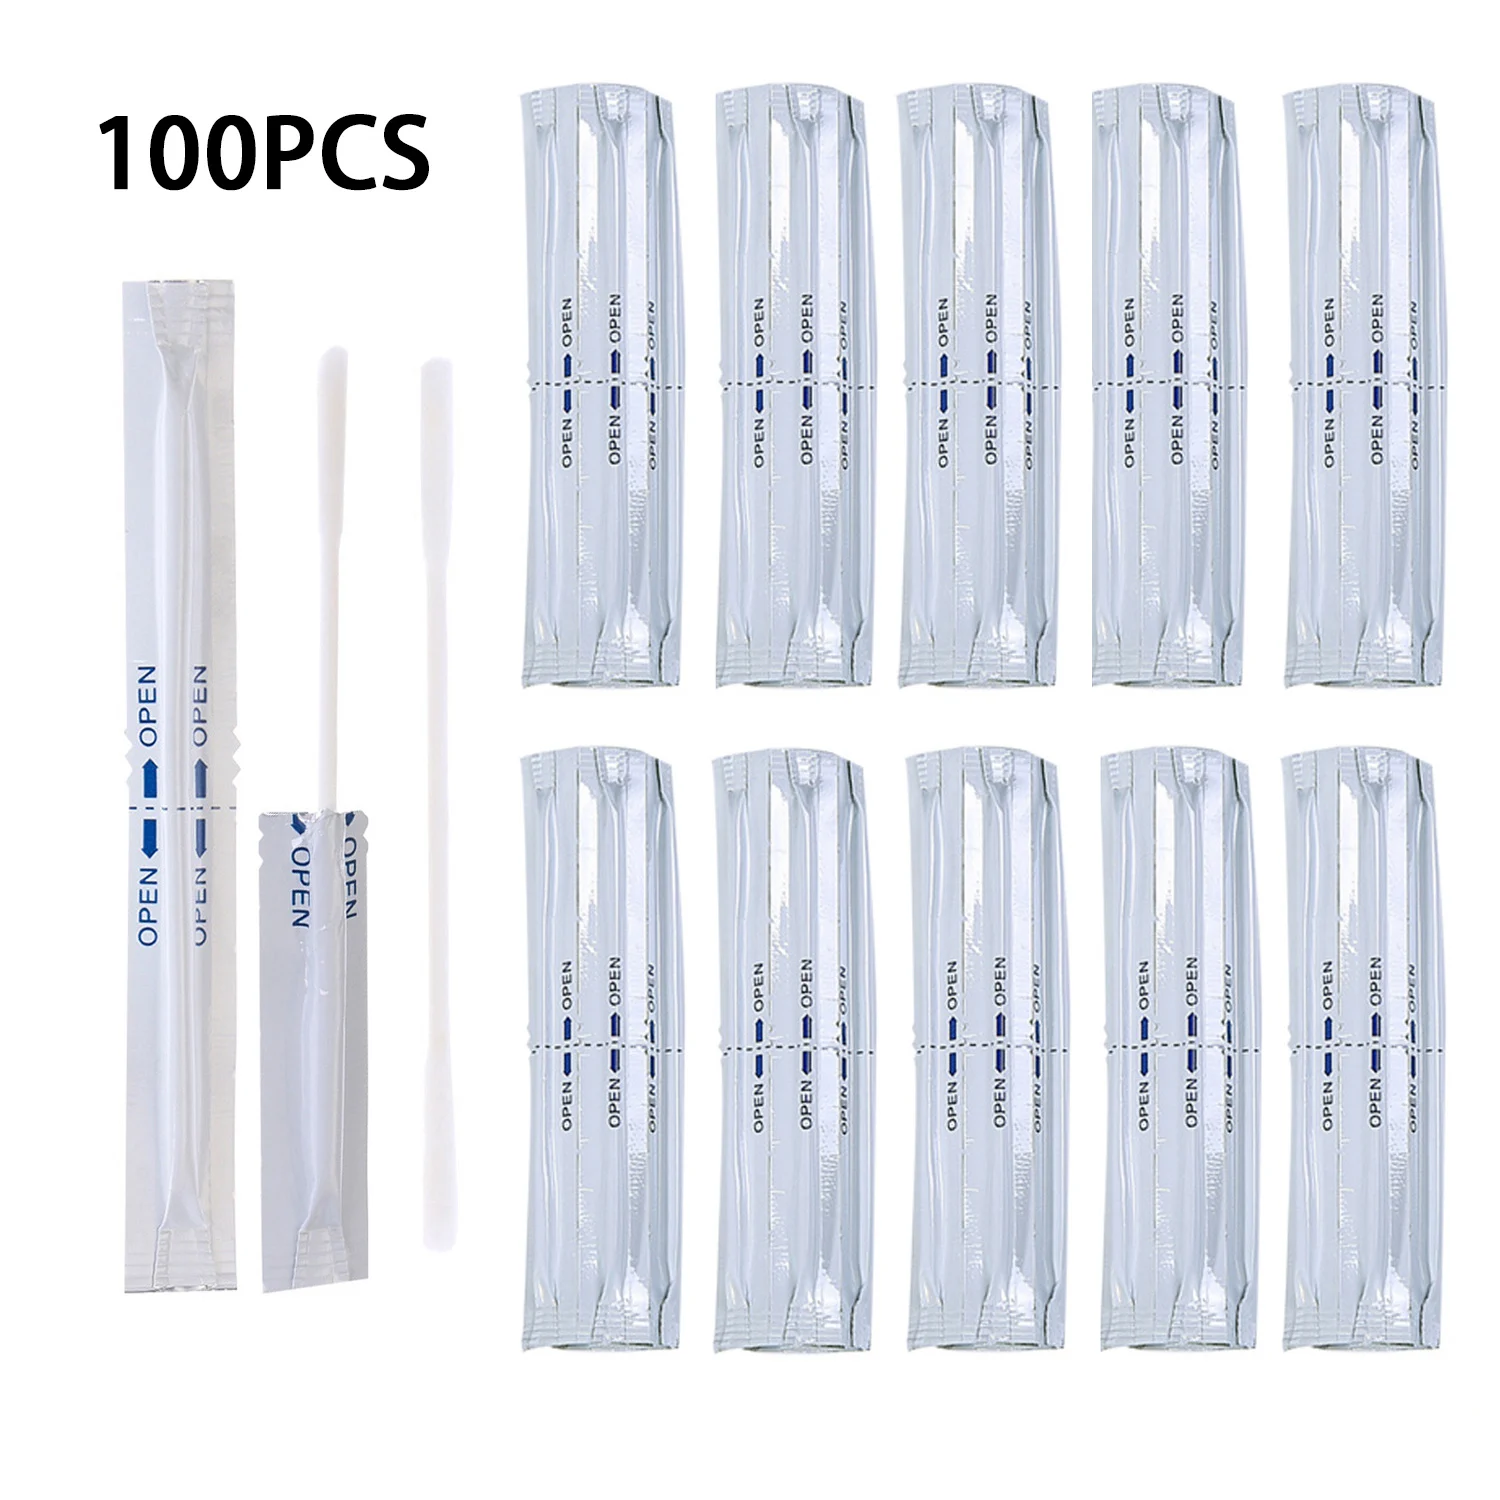 100pcs Wet Cotton Swabs Double Head Cleaning Stick For IQOS 3 Duo 3.0 Duo 3 2.4 PLUS LIL/LTN/HEETS/GLO Heater Cleaner Tools